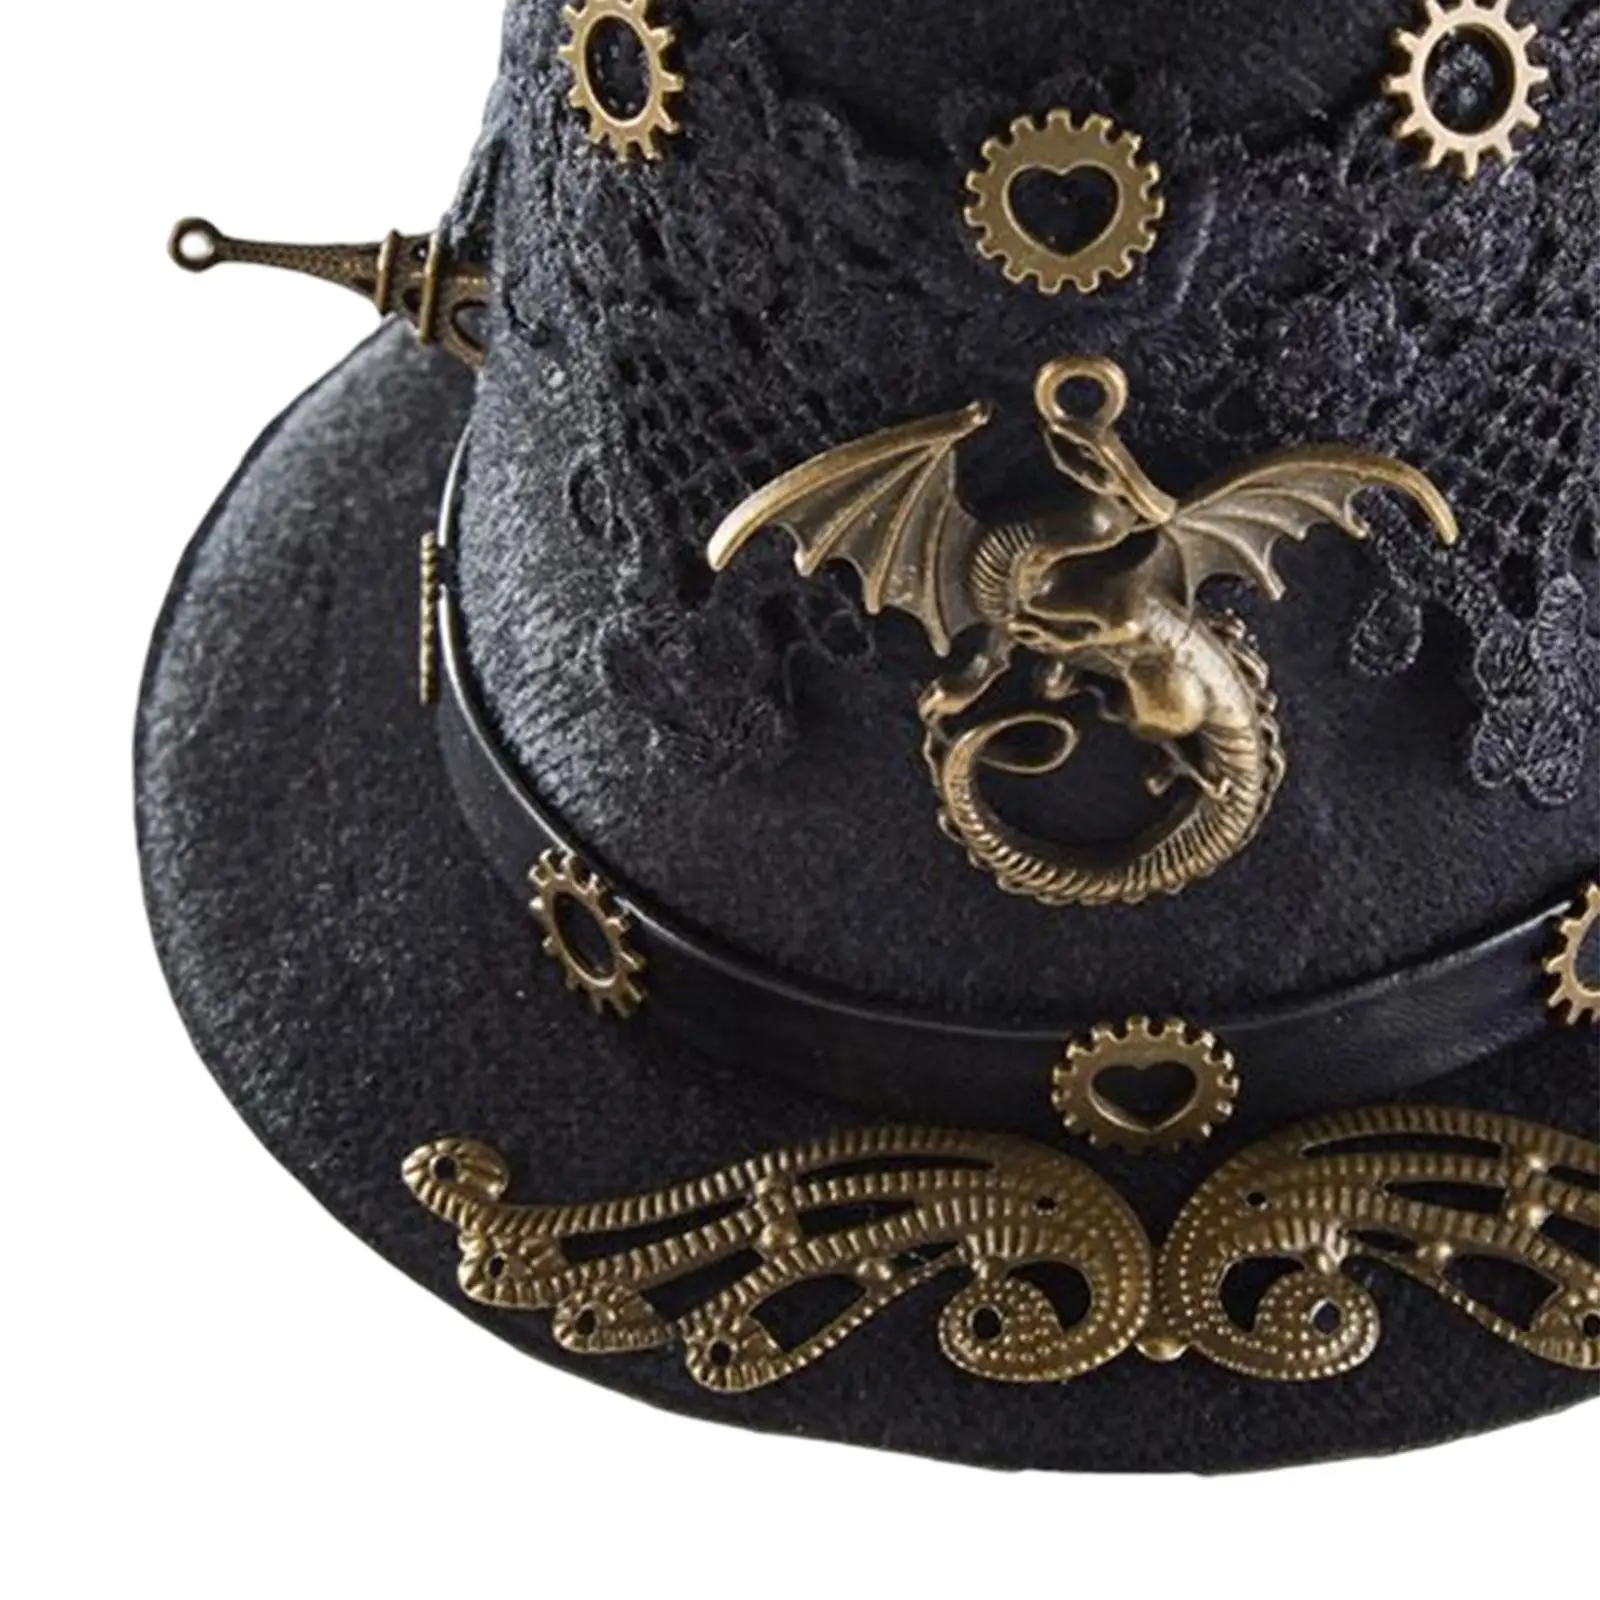 Retro Style Steampunk Top Hat, Unisex Decorative with Hair Clips Black Hat for Stage Performance Party Gift Cosplay Holidays